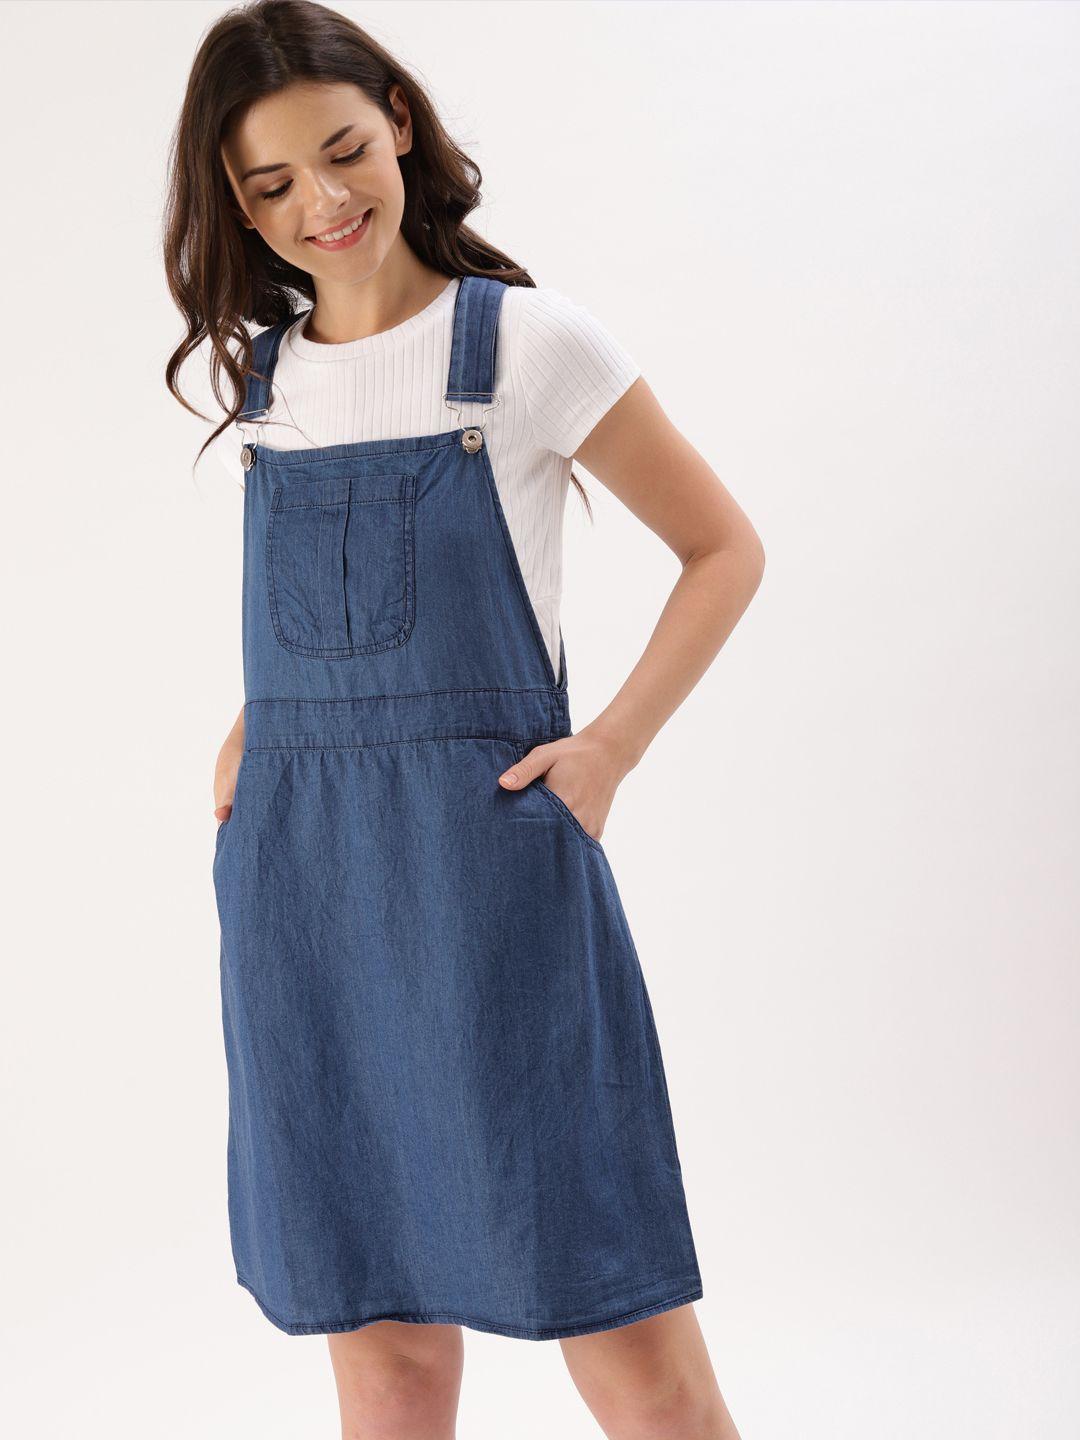 dressberry-women-blue-solid-chambray-pinafore-dress